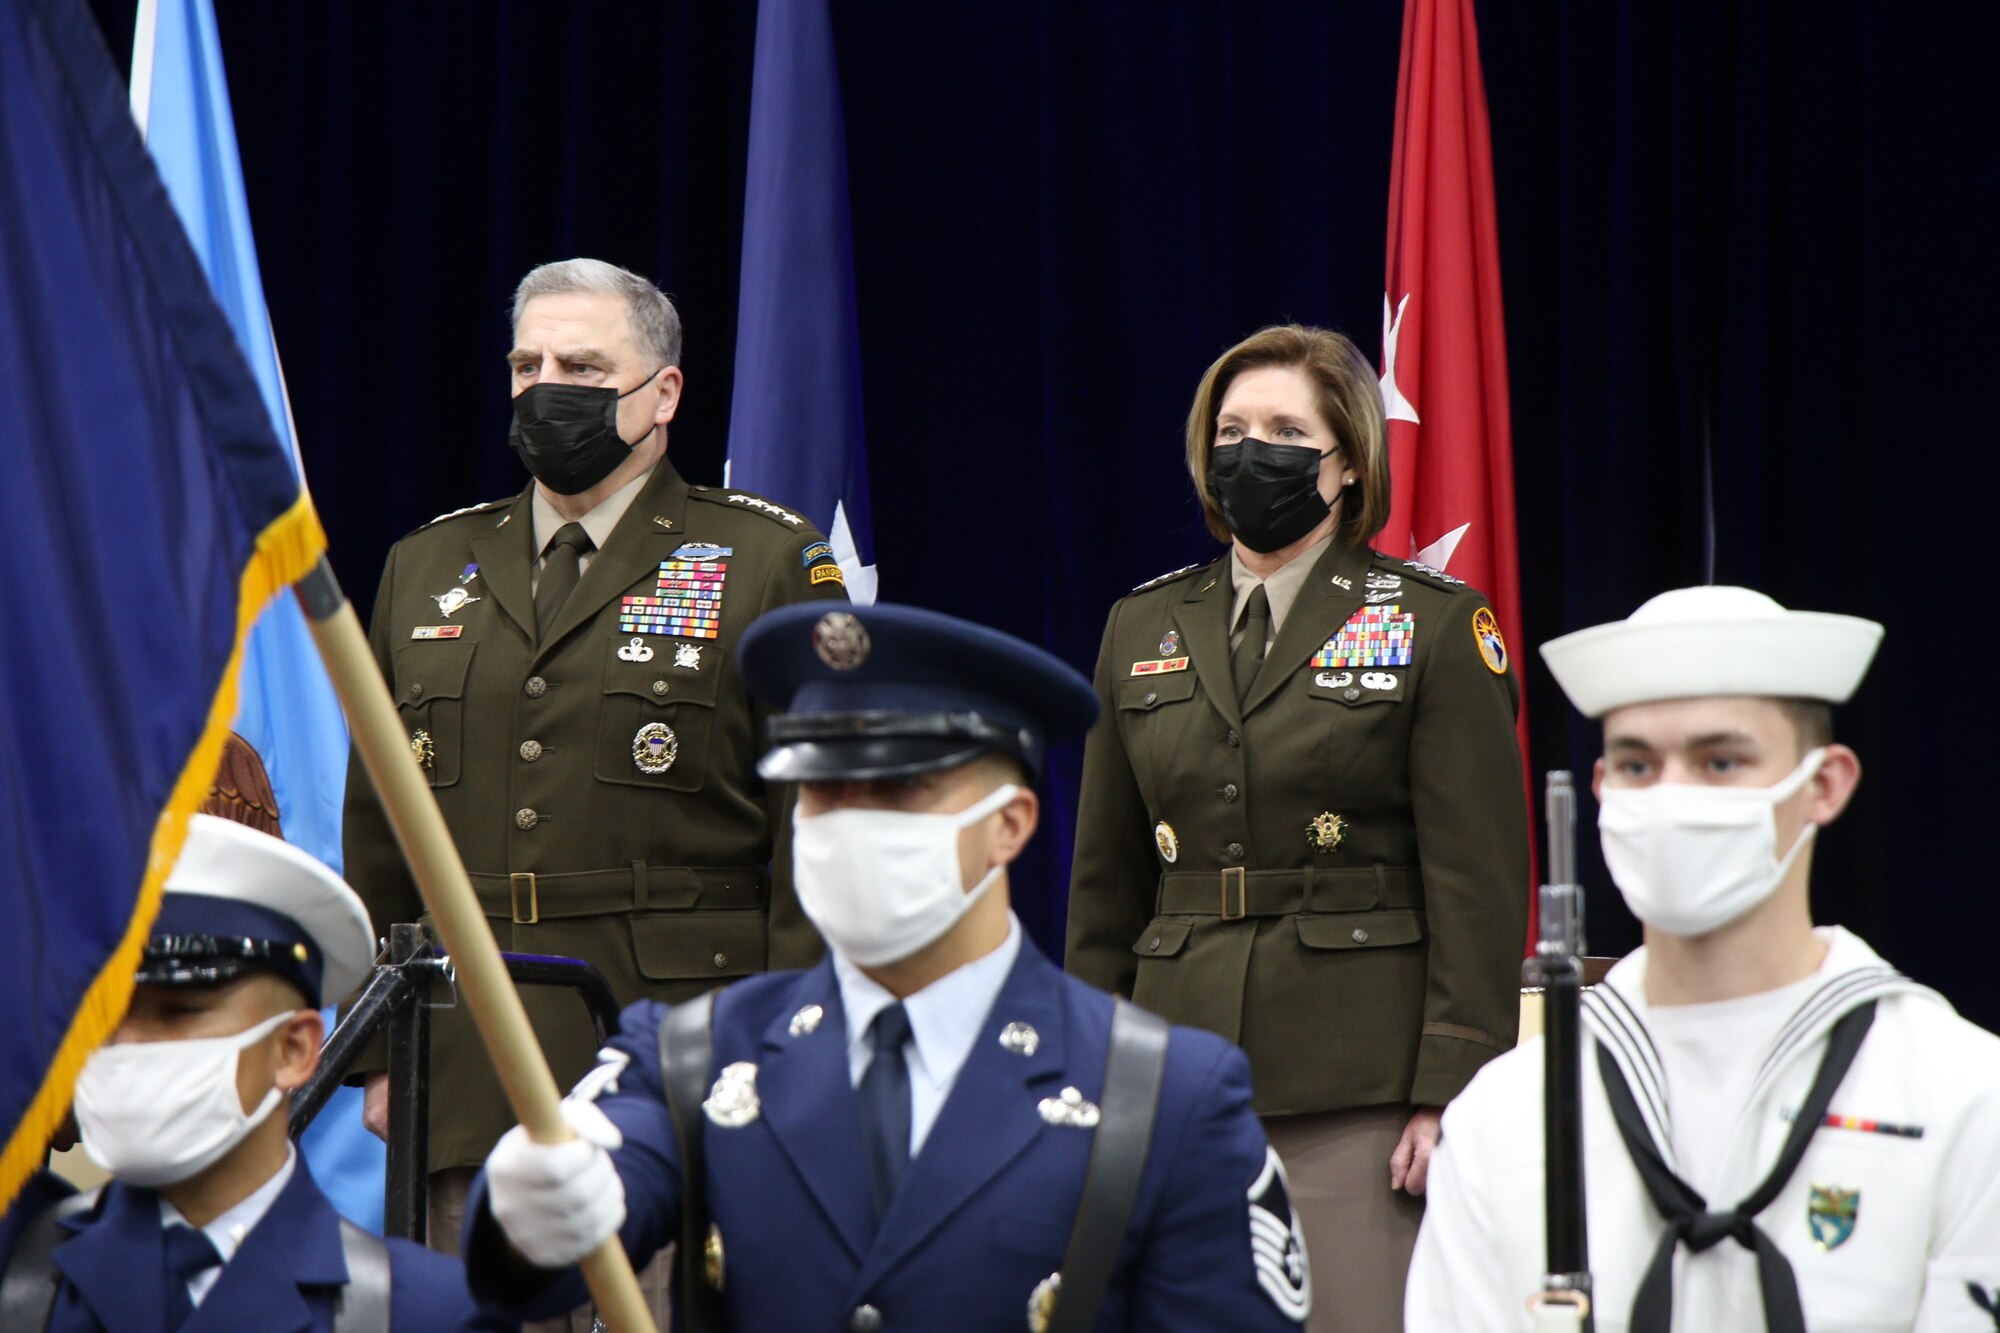 Members of the U.S. Southern Command Honor Guard present the colors while Chairman of the Joint Chiefs of Staff Gen. Mark A. Milley and U.S. Army Gen. Laura J. Richardson, incoming commander of U.S. Southern Command, stand at attention during a change of command ceremony at SOUTHCOM Headquarters in Doral, Florida, Oct. 29, 2021. Richardson will succeed U.S. Navy Adm. Craig S. Faller, who has led SOUTHCOM since November 2018 and will retire after four decades of military service. (U.S. SOUTHCOM photo by Master Sgt. Stephen J. Caruso)